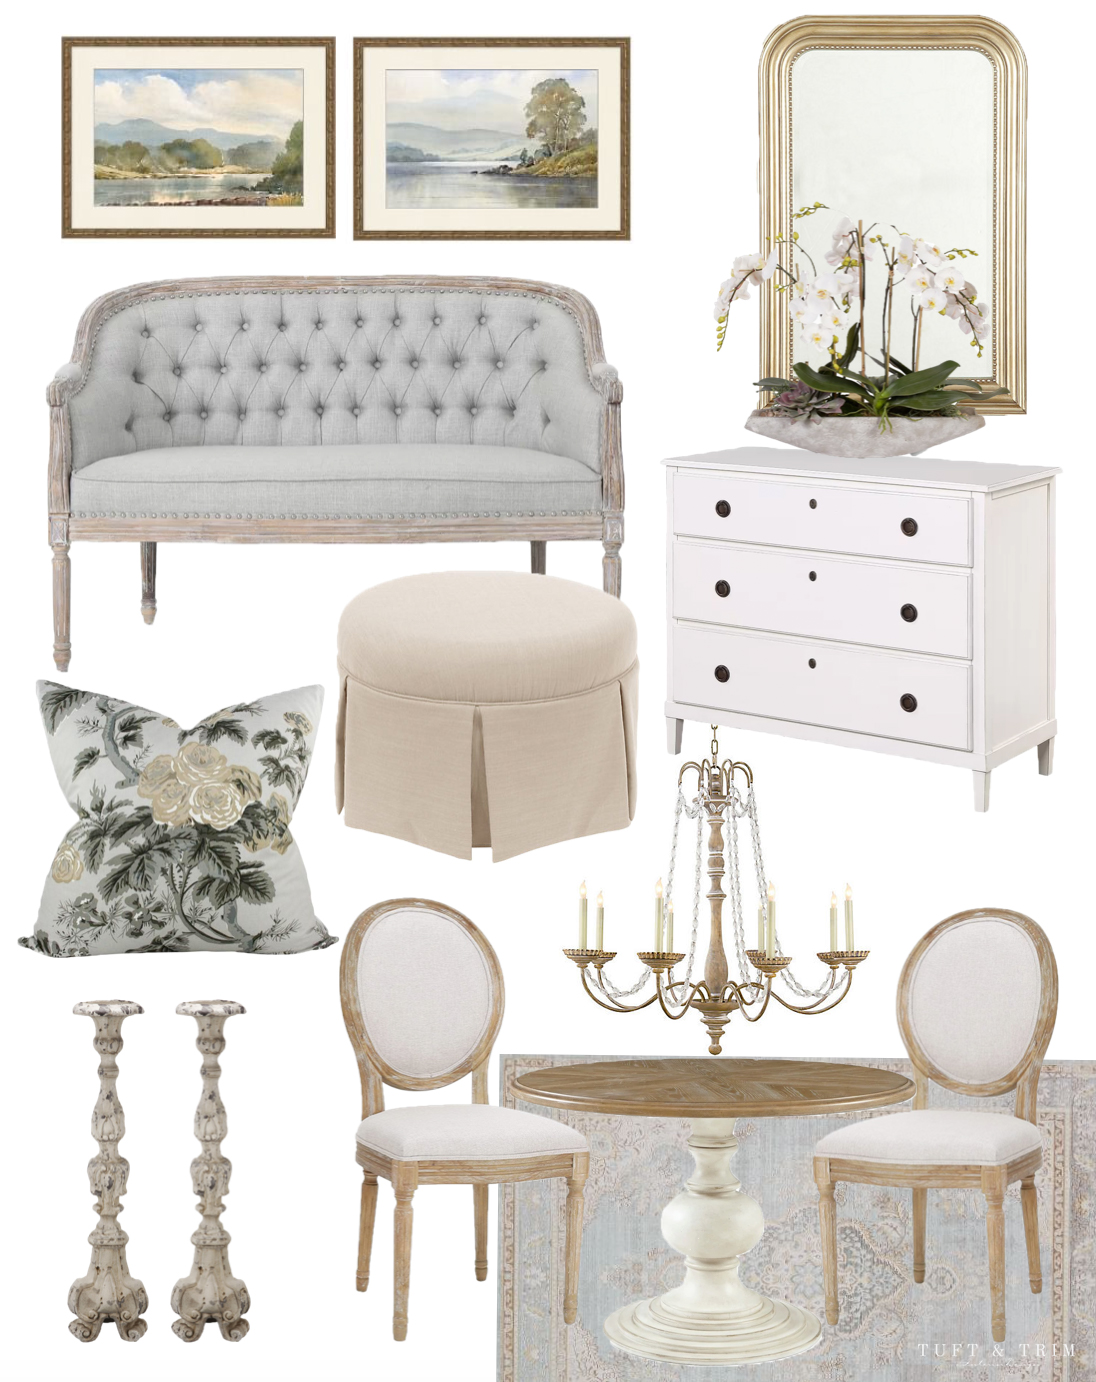 Friday Favorites: Affordable French Country Style